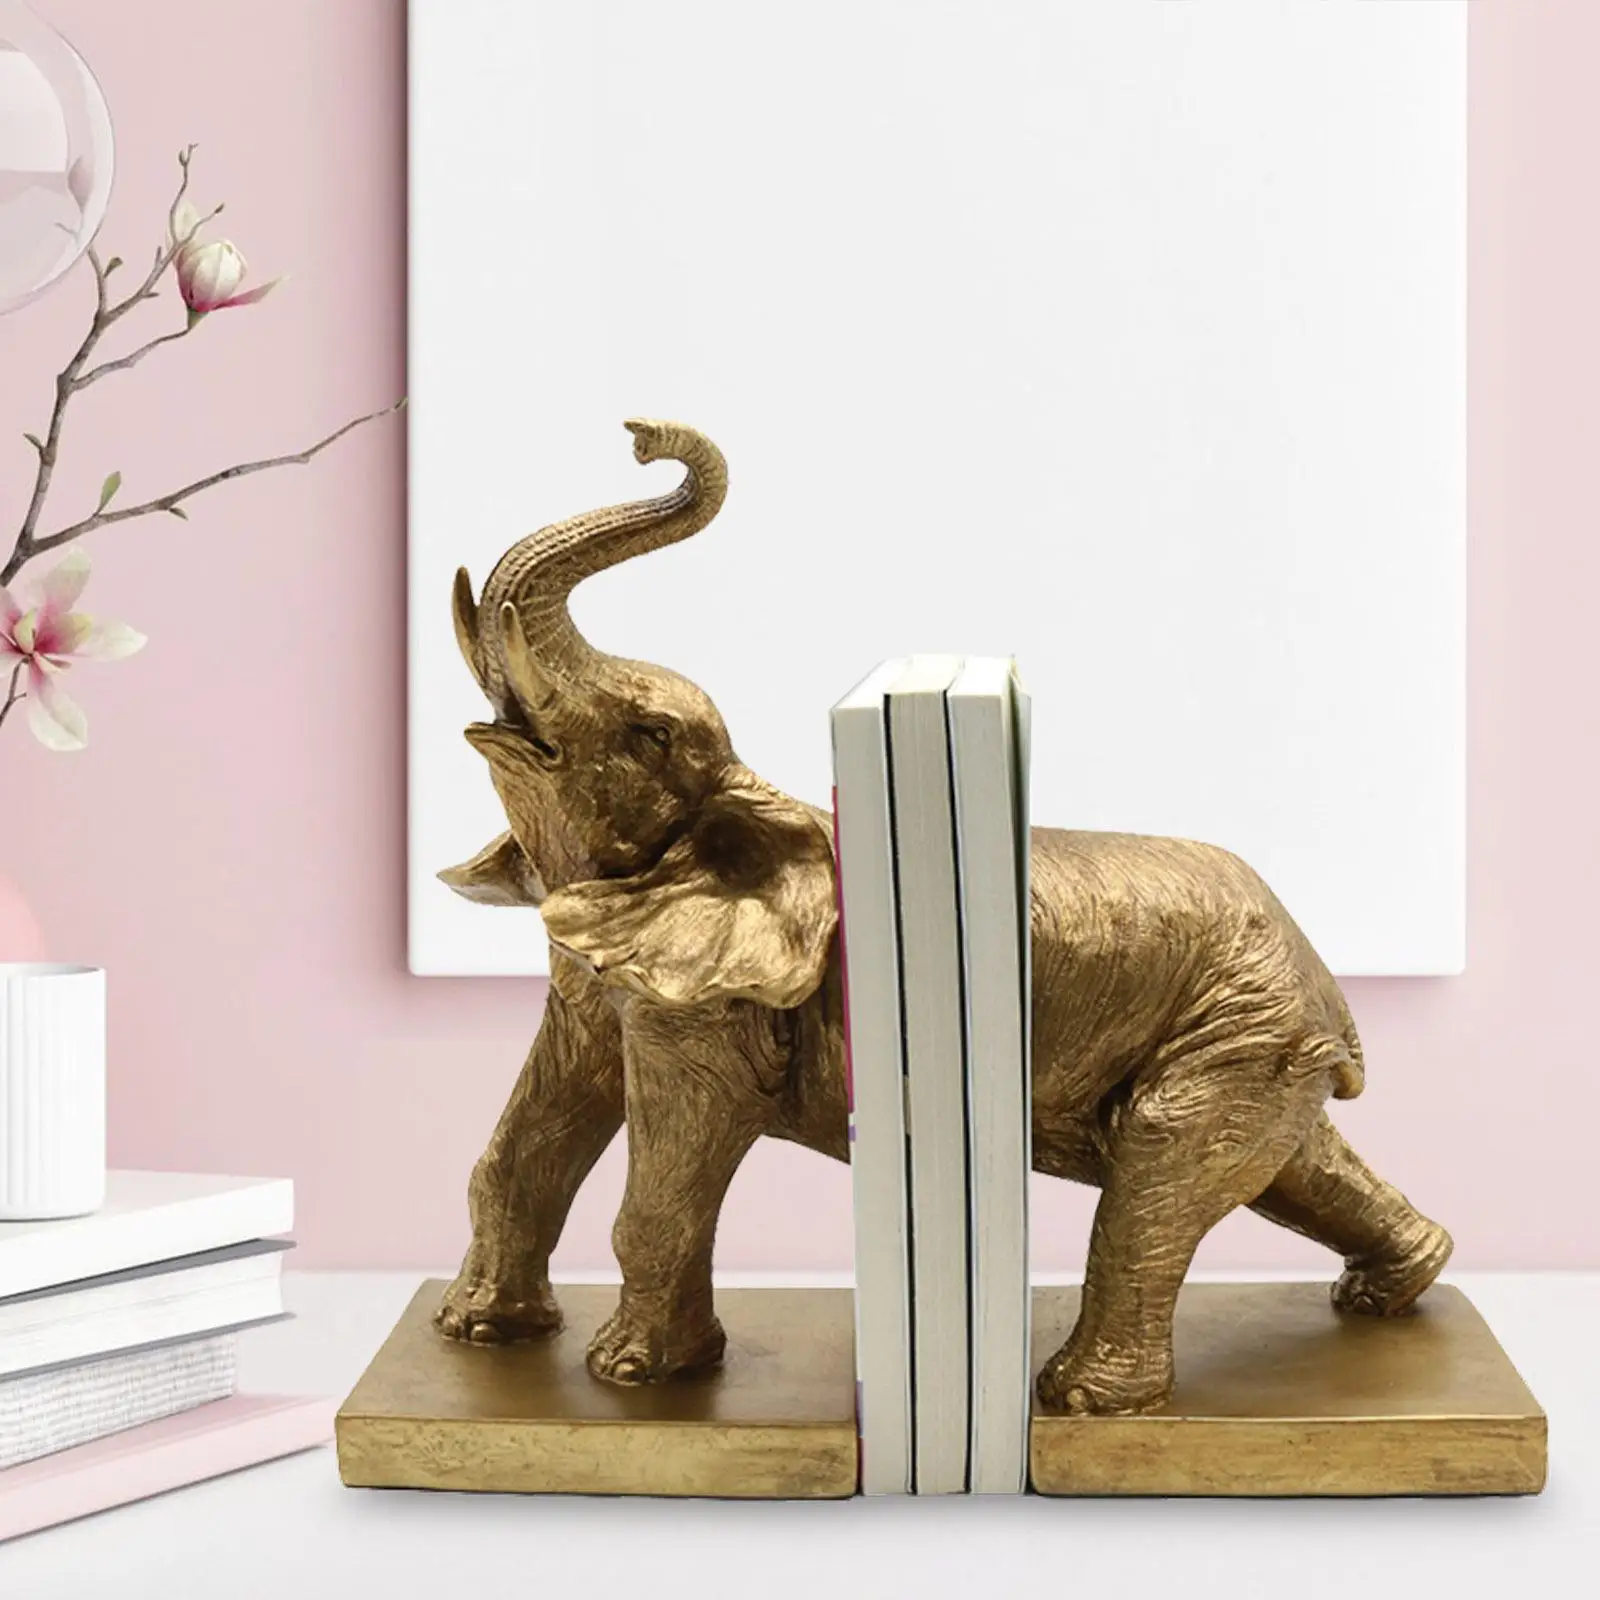 Elephant Statue Bookend Freestanding Art Bookend Resin Book Stand Holder for Bedroom Wine Cabinet Living Room Tabletop Bookcase